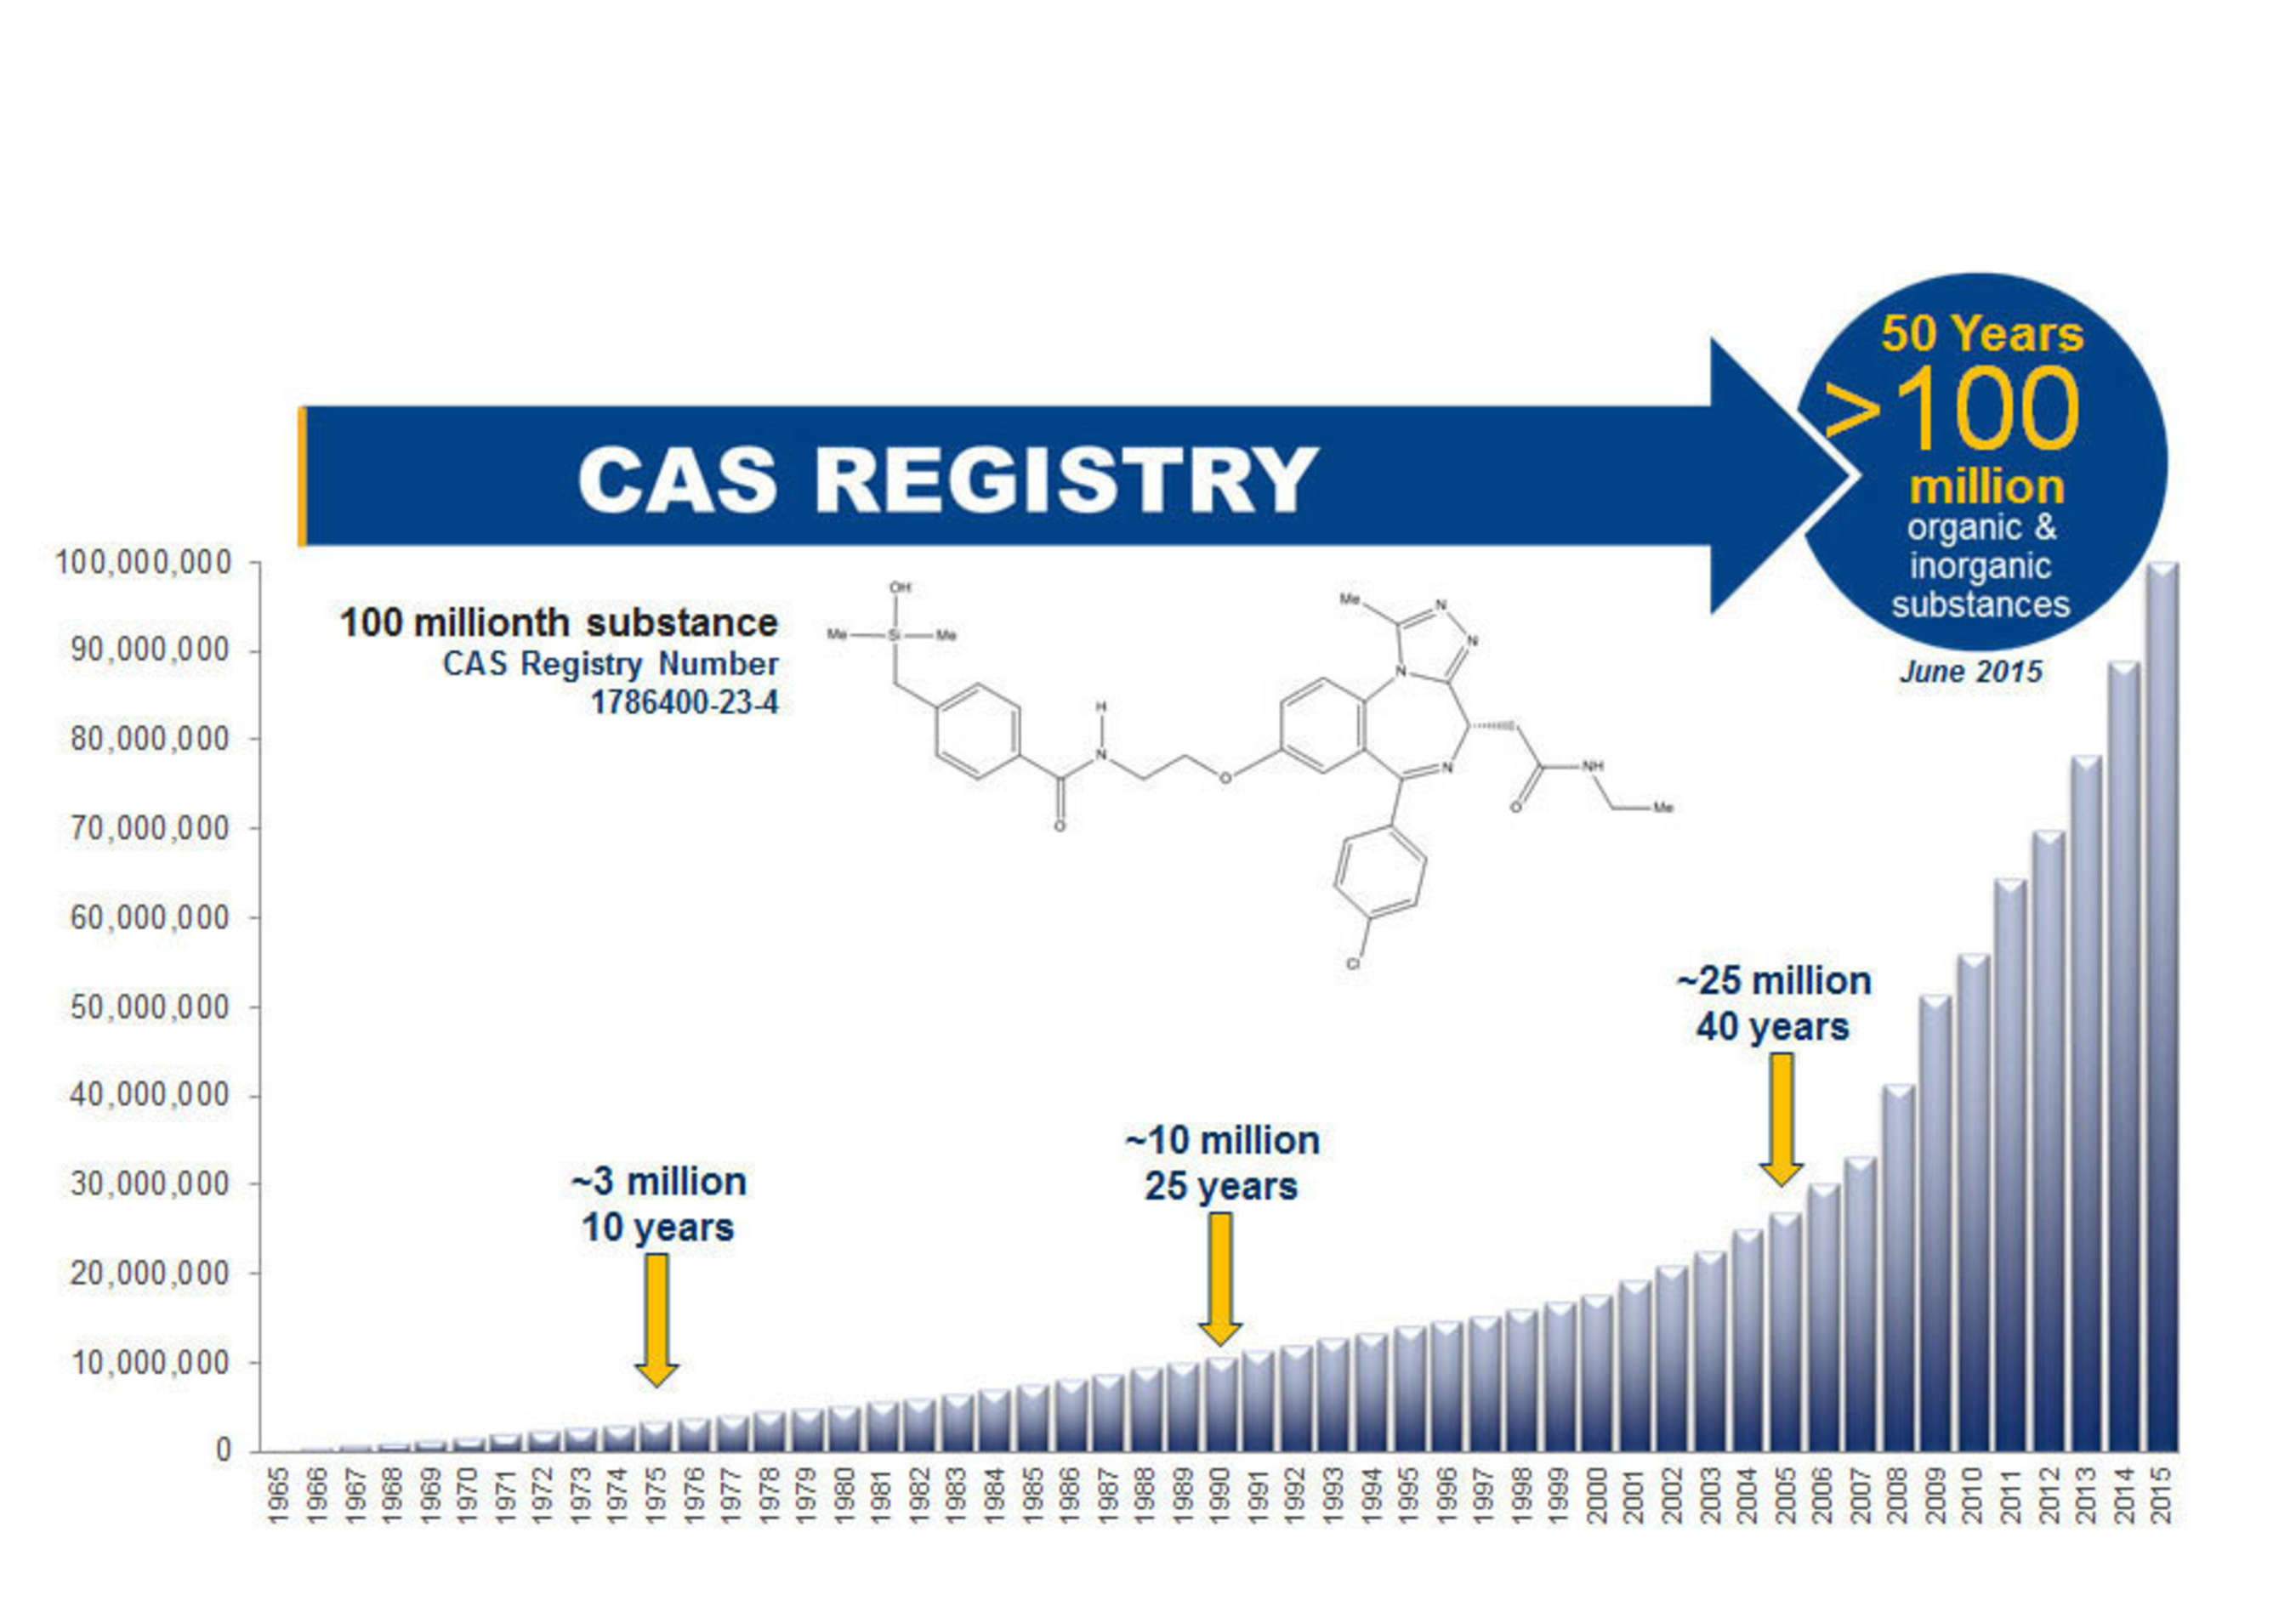 Figure 1:  Growth in the CAS REGISTRY over 50 years